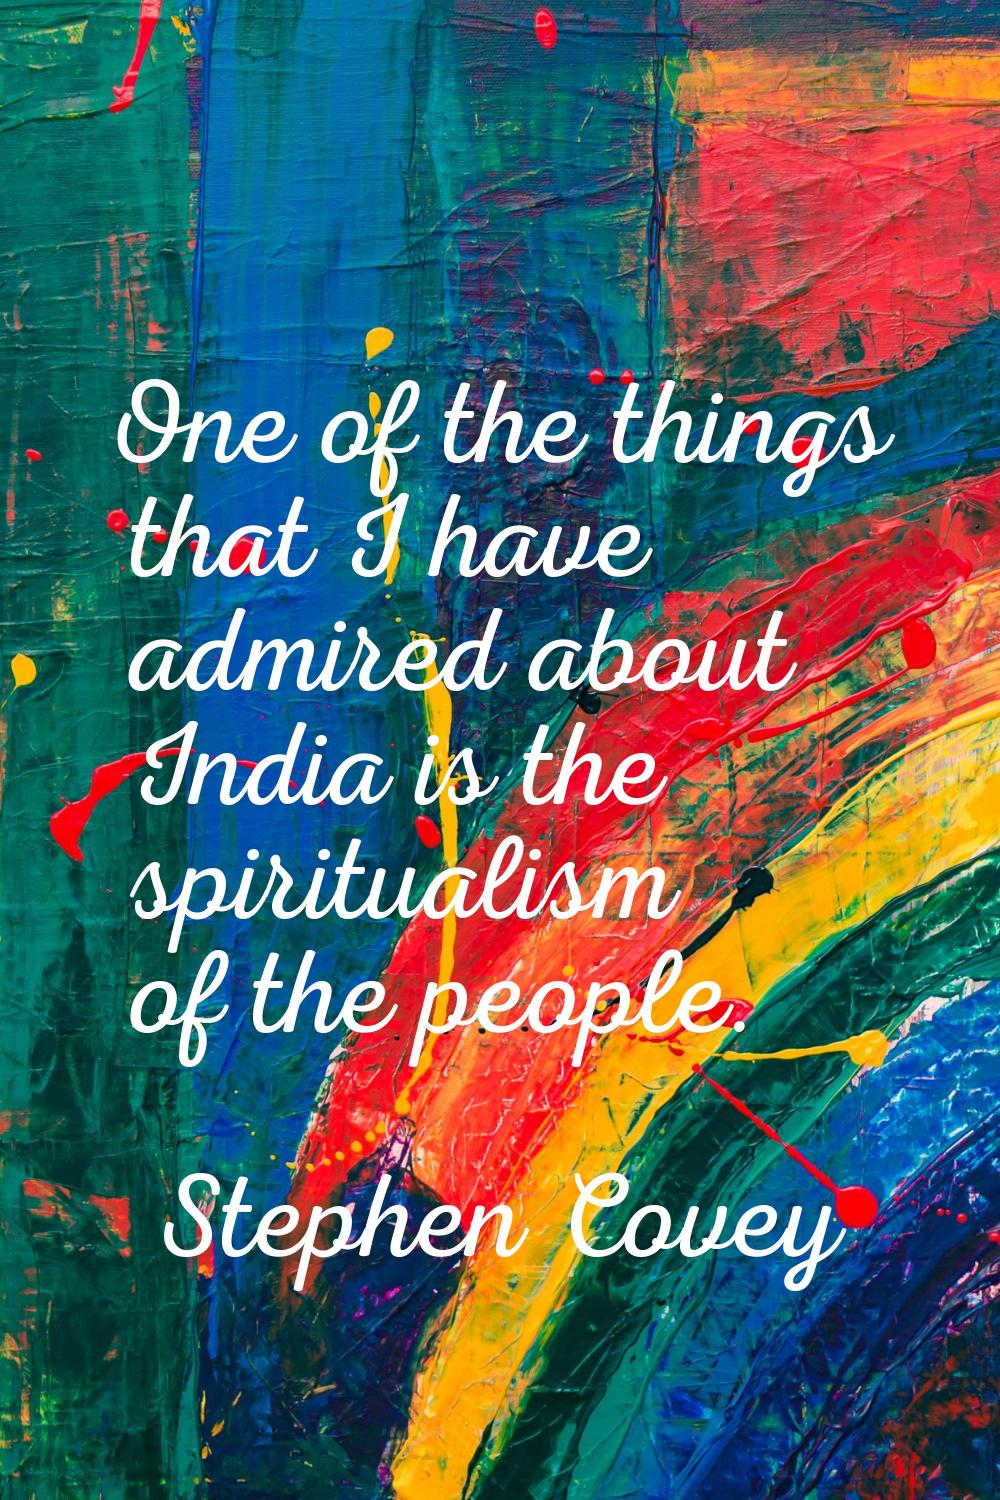 One of the things that I have admired about India is the spiritualism of the people.